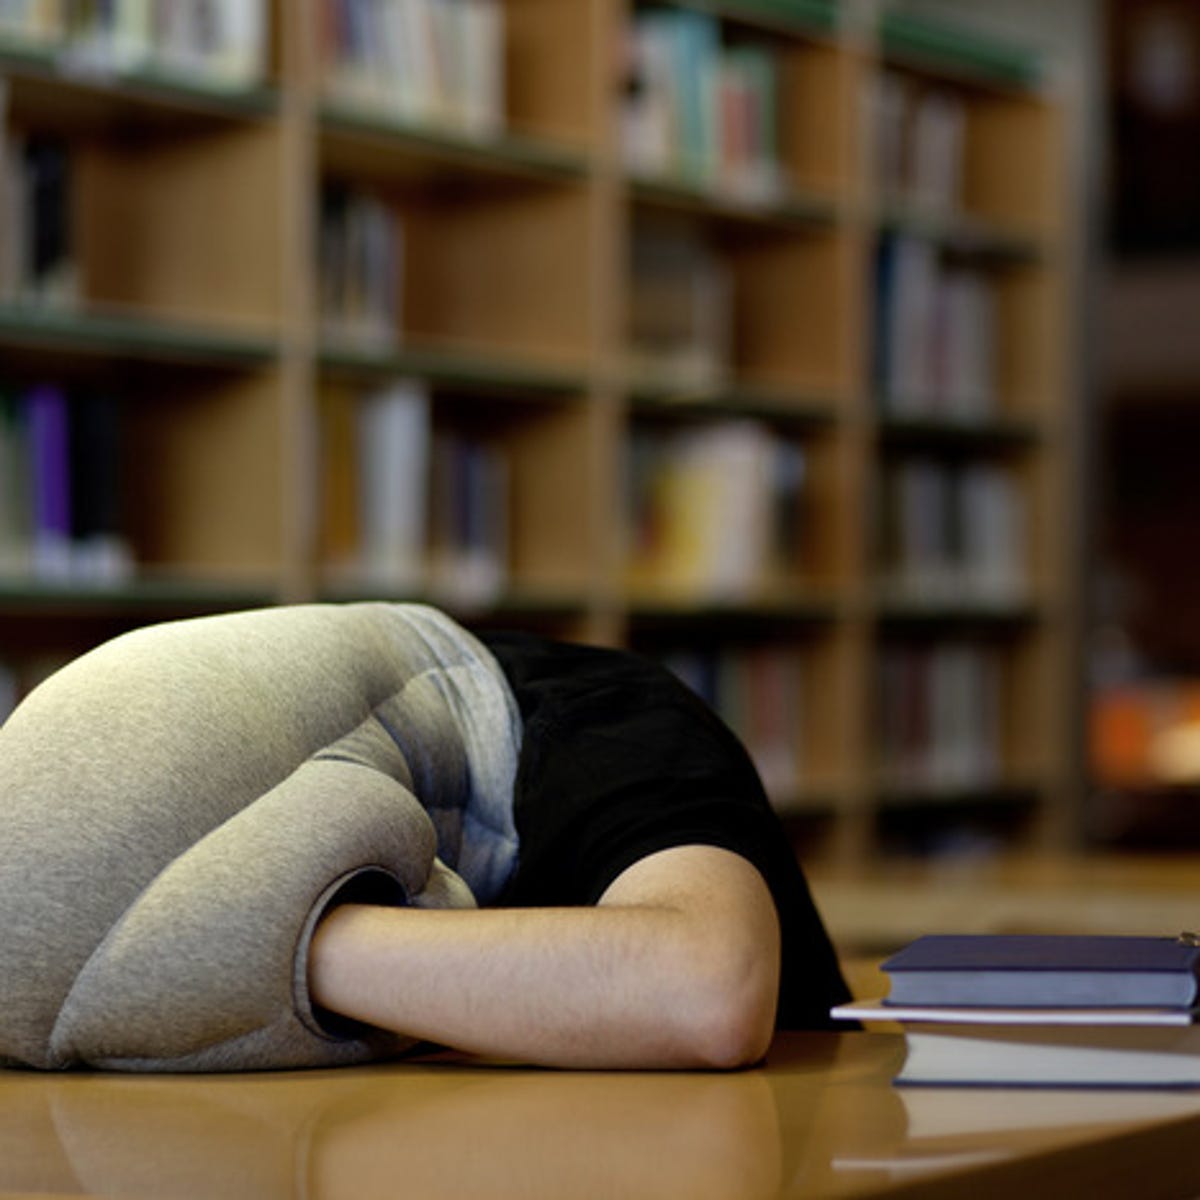 Ostrich Pillow lets you bury your head in your nap - CNET